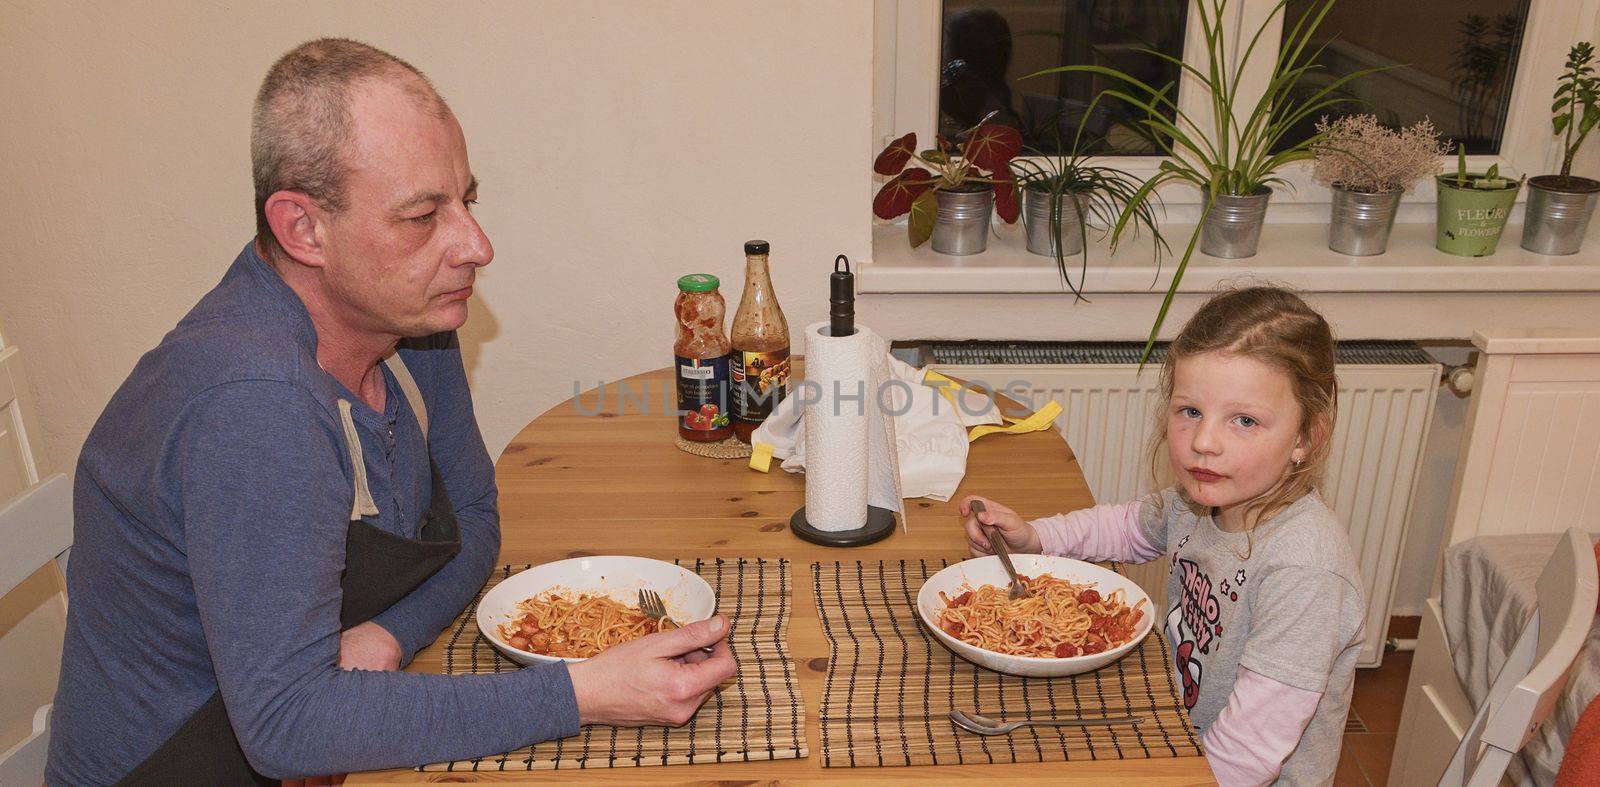 Daughter and father in the kitchen eating spaghetti for dinner.